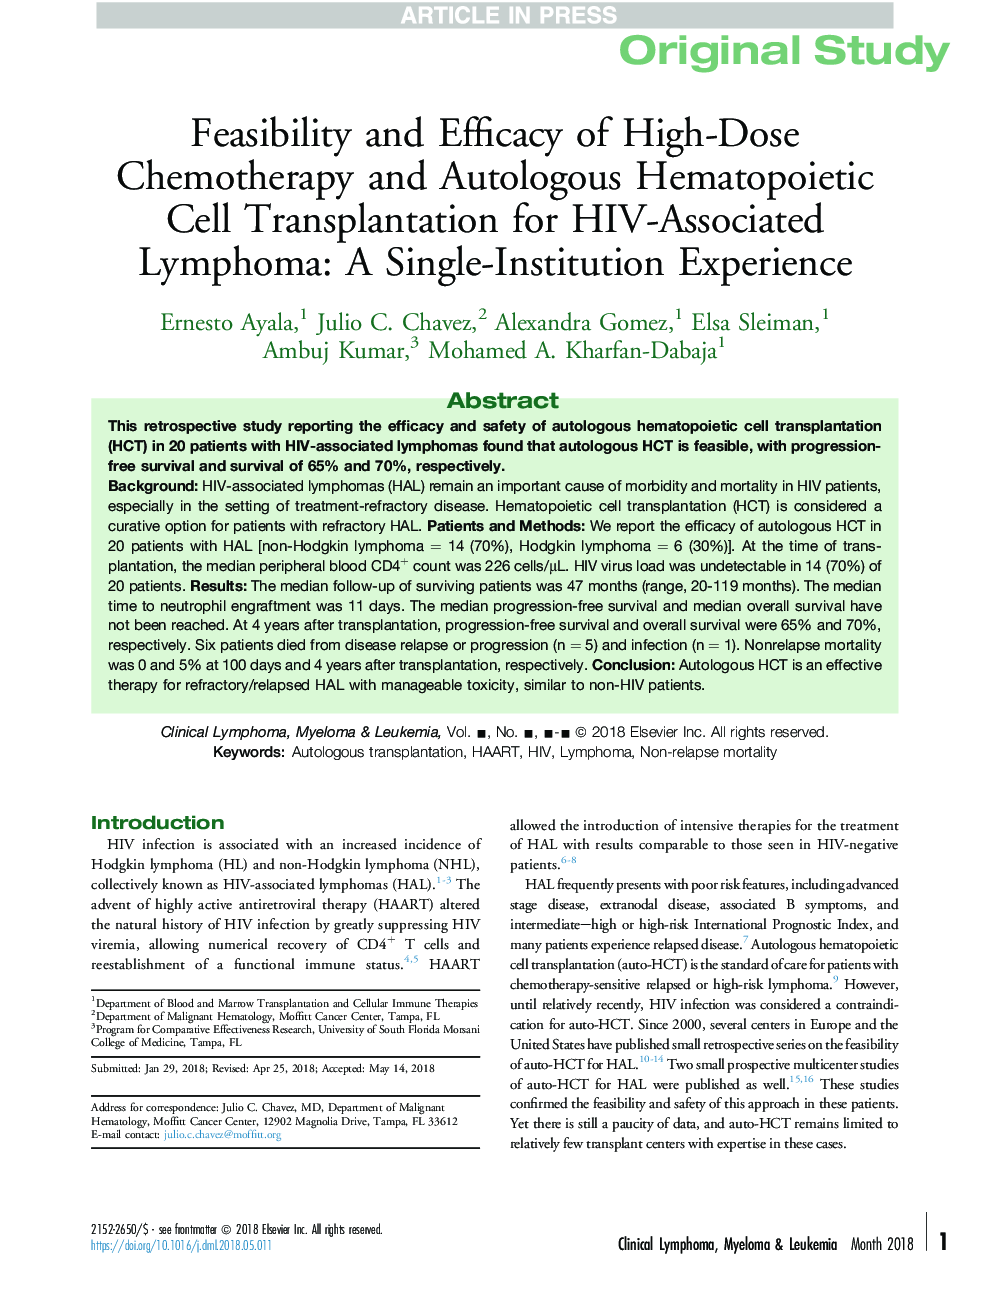 Feasibility and Efficacy of High-Dose Chemotherapy and Autologous Hematopoietic Cell Transplantation for HIV-Associated Lymphoma: A Single-Institution Experience